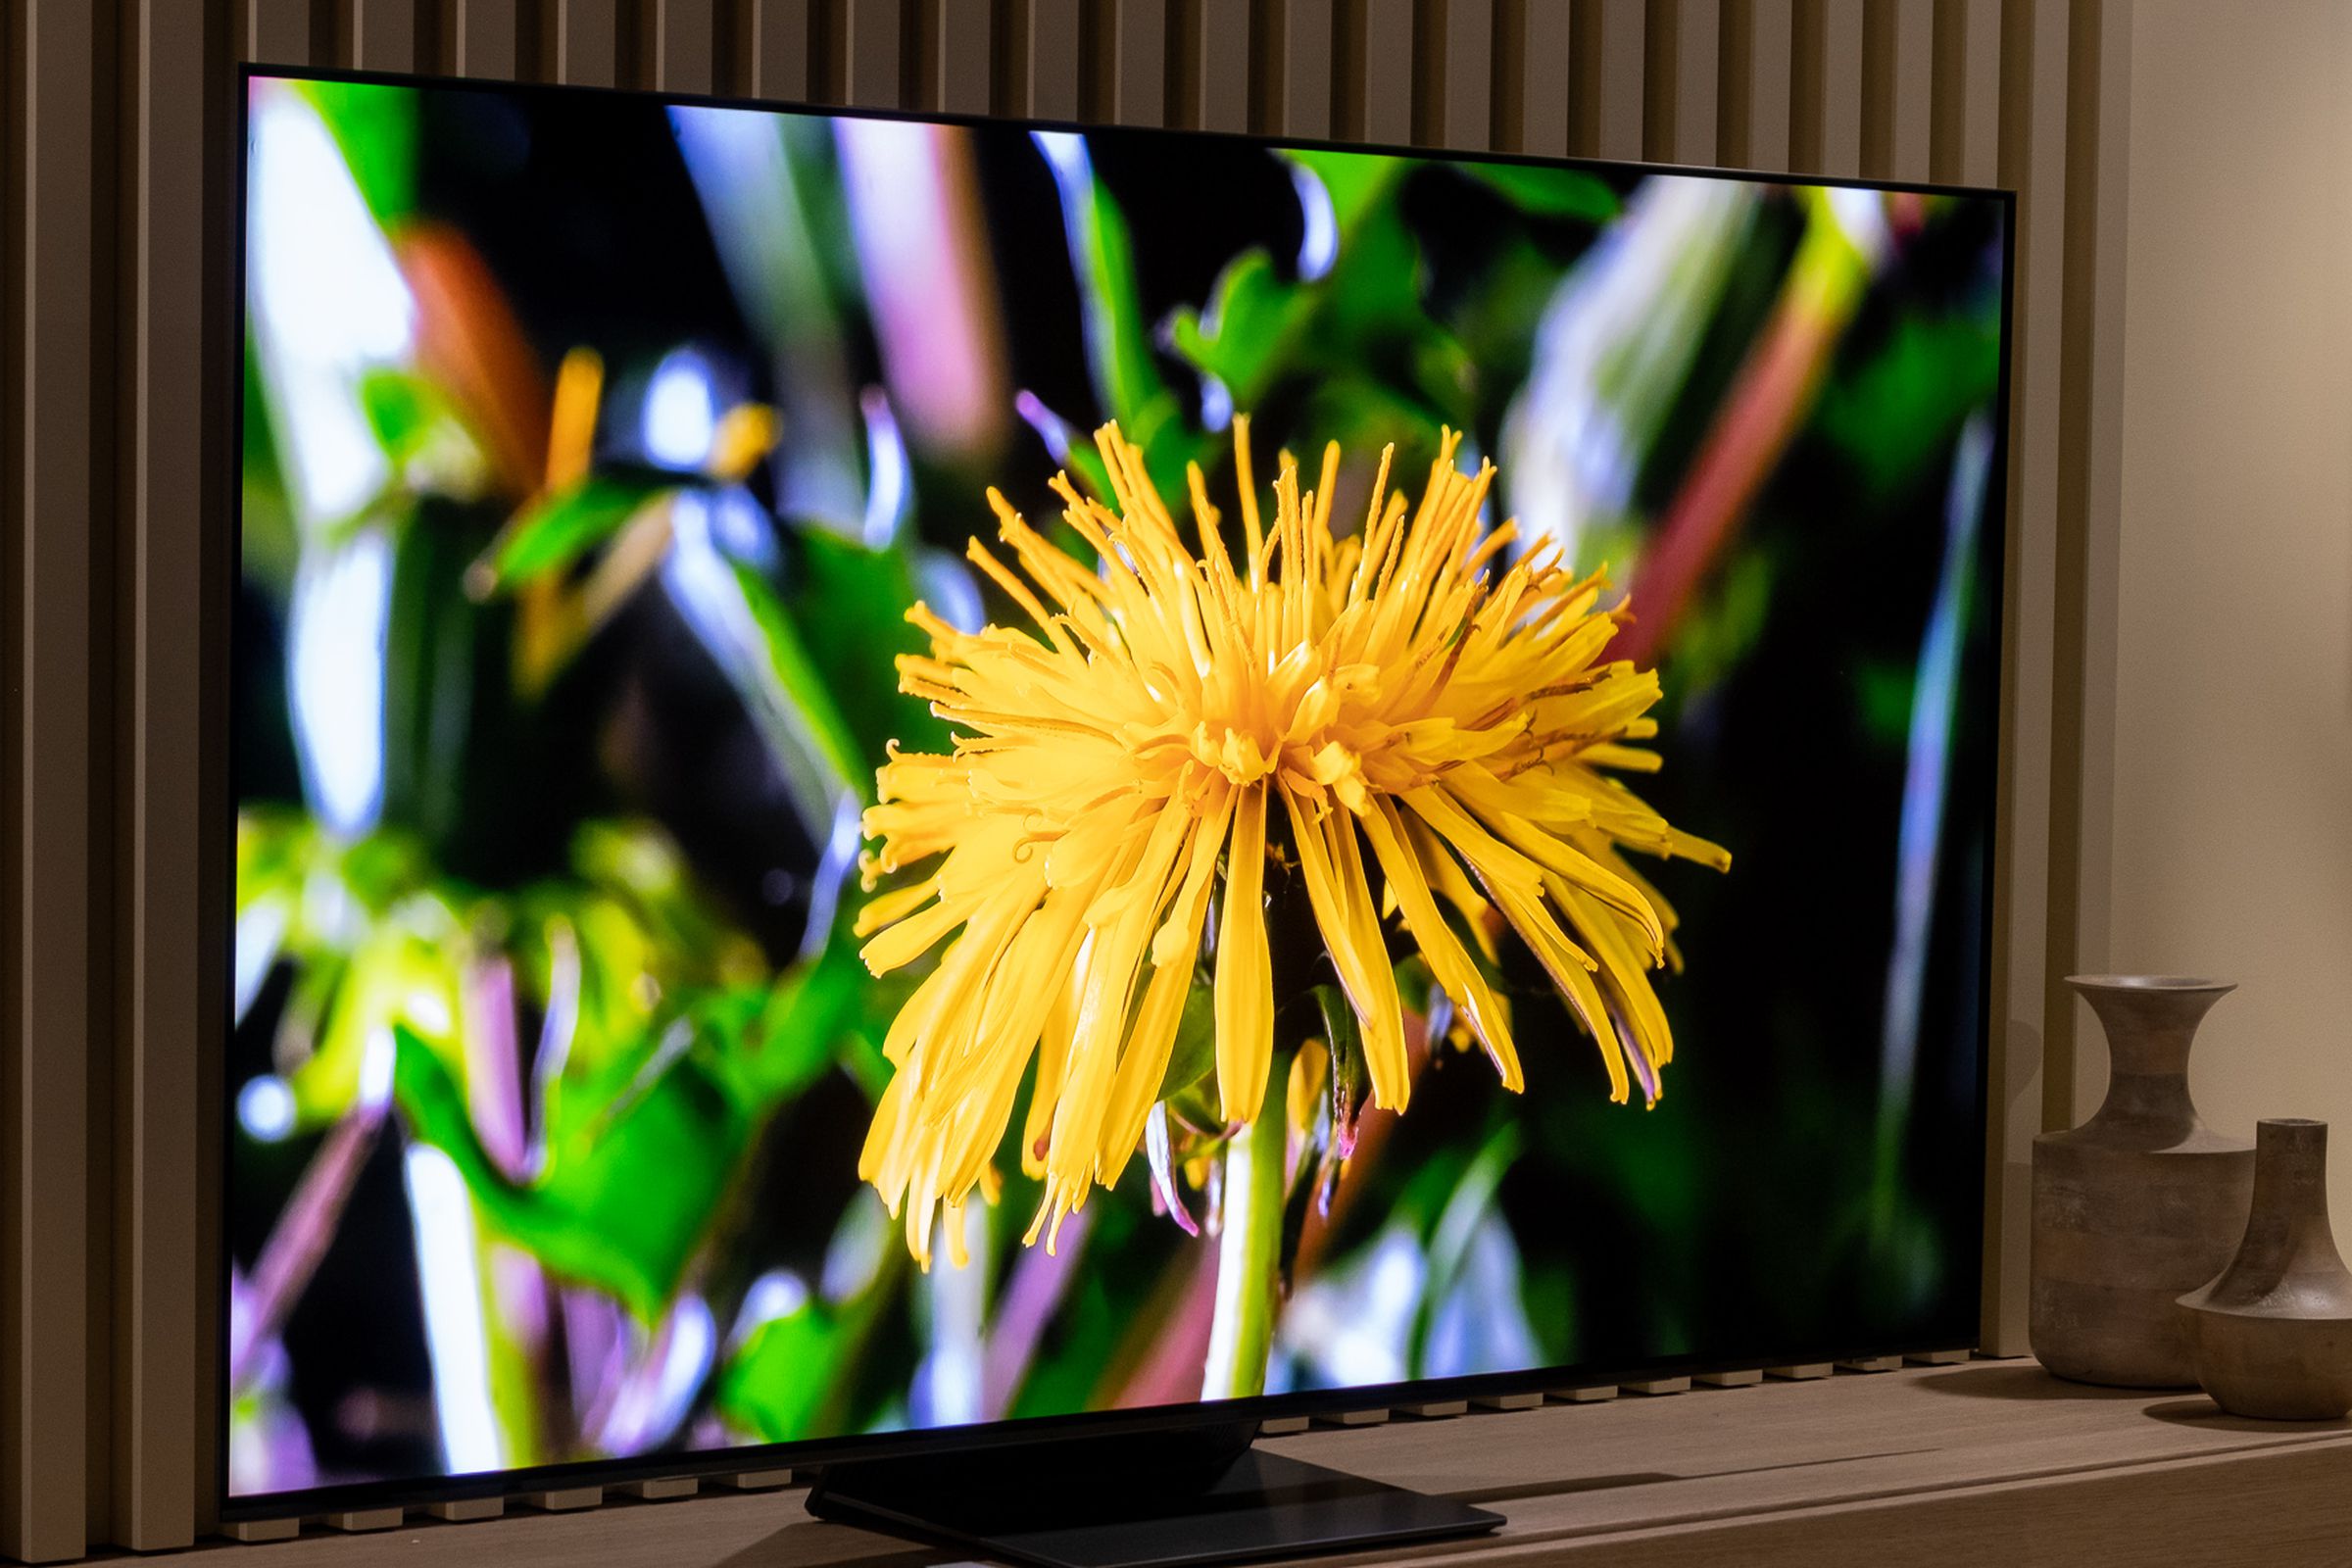 An image showing a TV with a flower on it